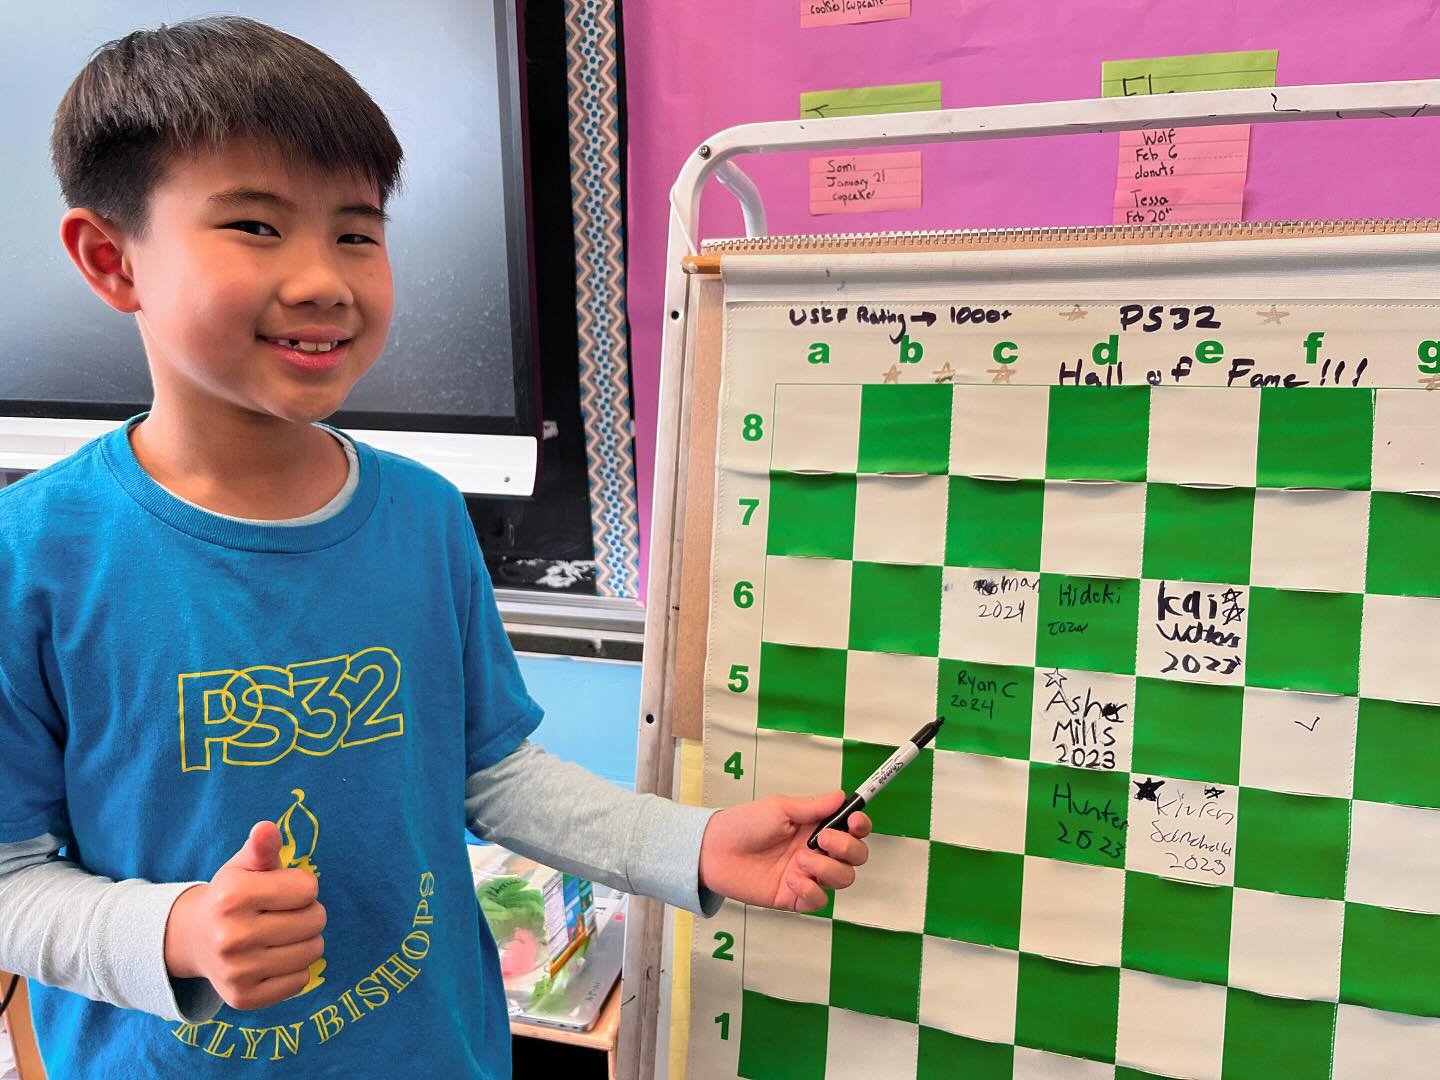 Hall of Fame Wednesday for the Brooklyn Bishops! Congratulations to Ryan for breaking 1000 at our Spring Break chess camp 🏆 

#ps32chess @ps32brooklyn #1000plususcf #halloffame